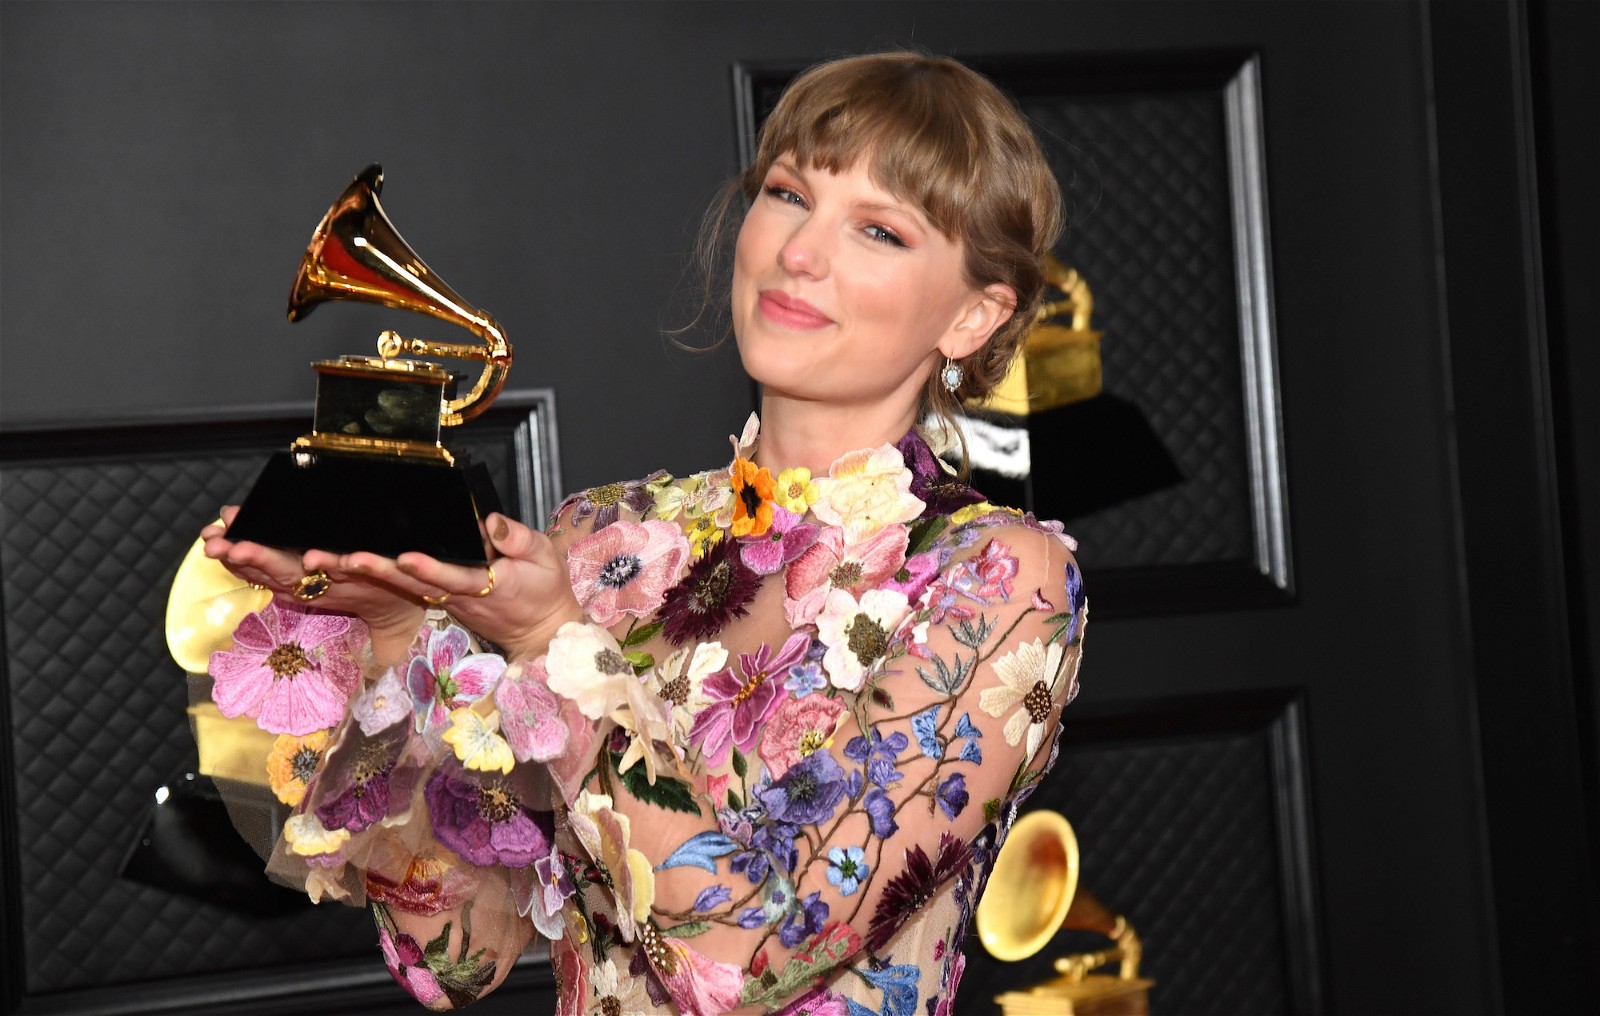 Taylor Swift at the Grammy Awards 2021 with her Grammy